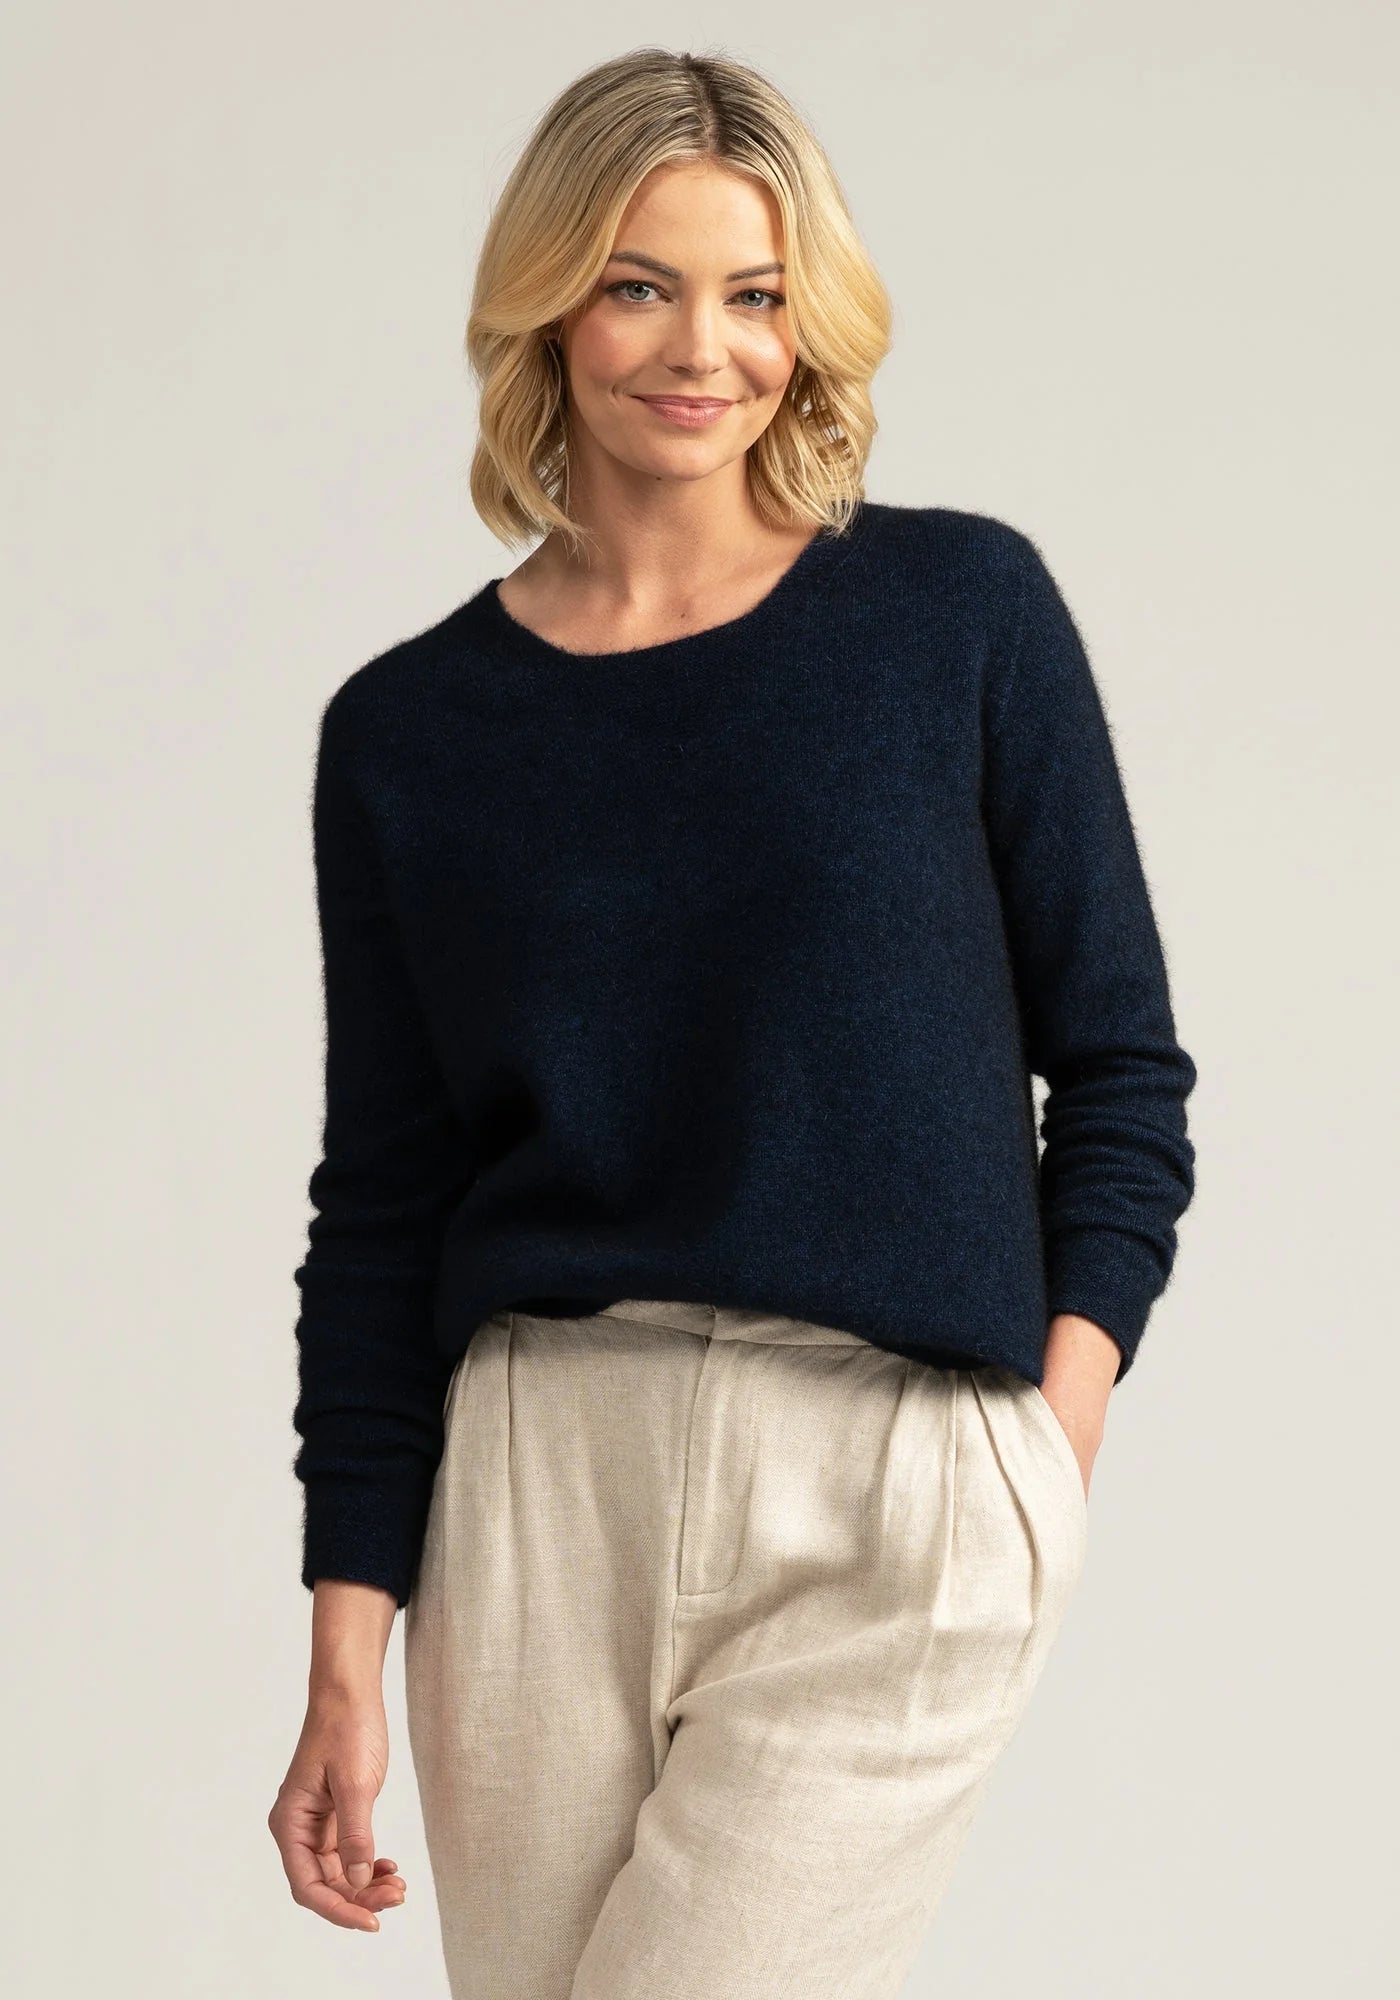 Upgrade your style with our pure merino wool navy blue sweater. Elegant, warm, and perfect for layering. Don’t miss out—buy now for a timeless look!